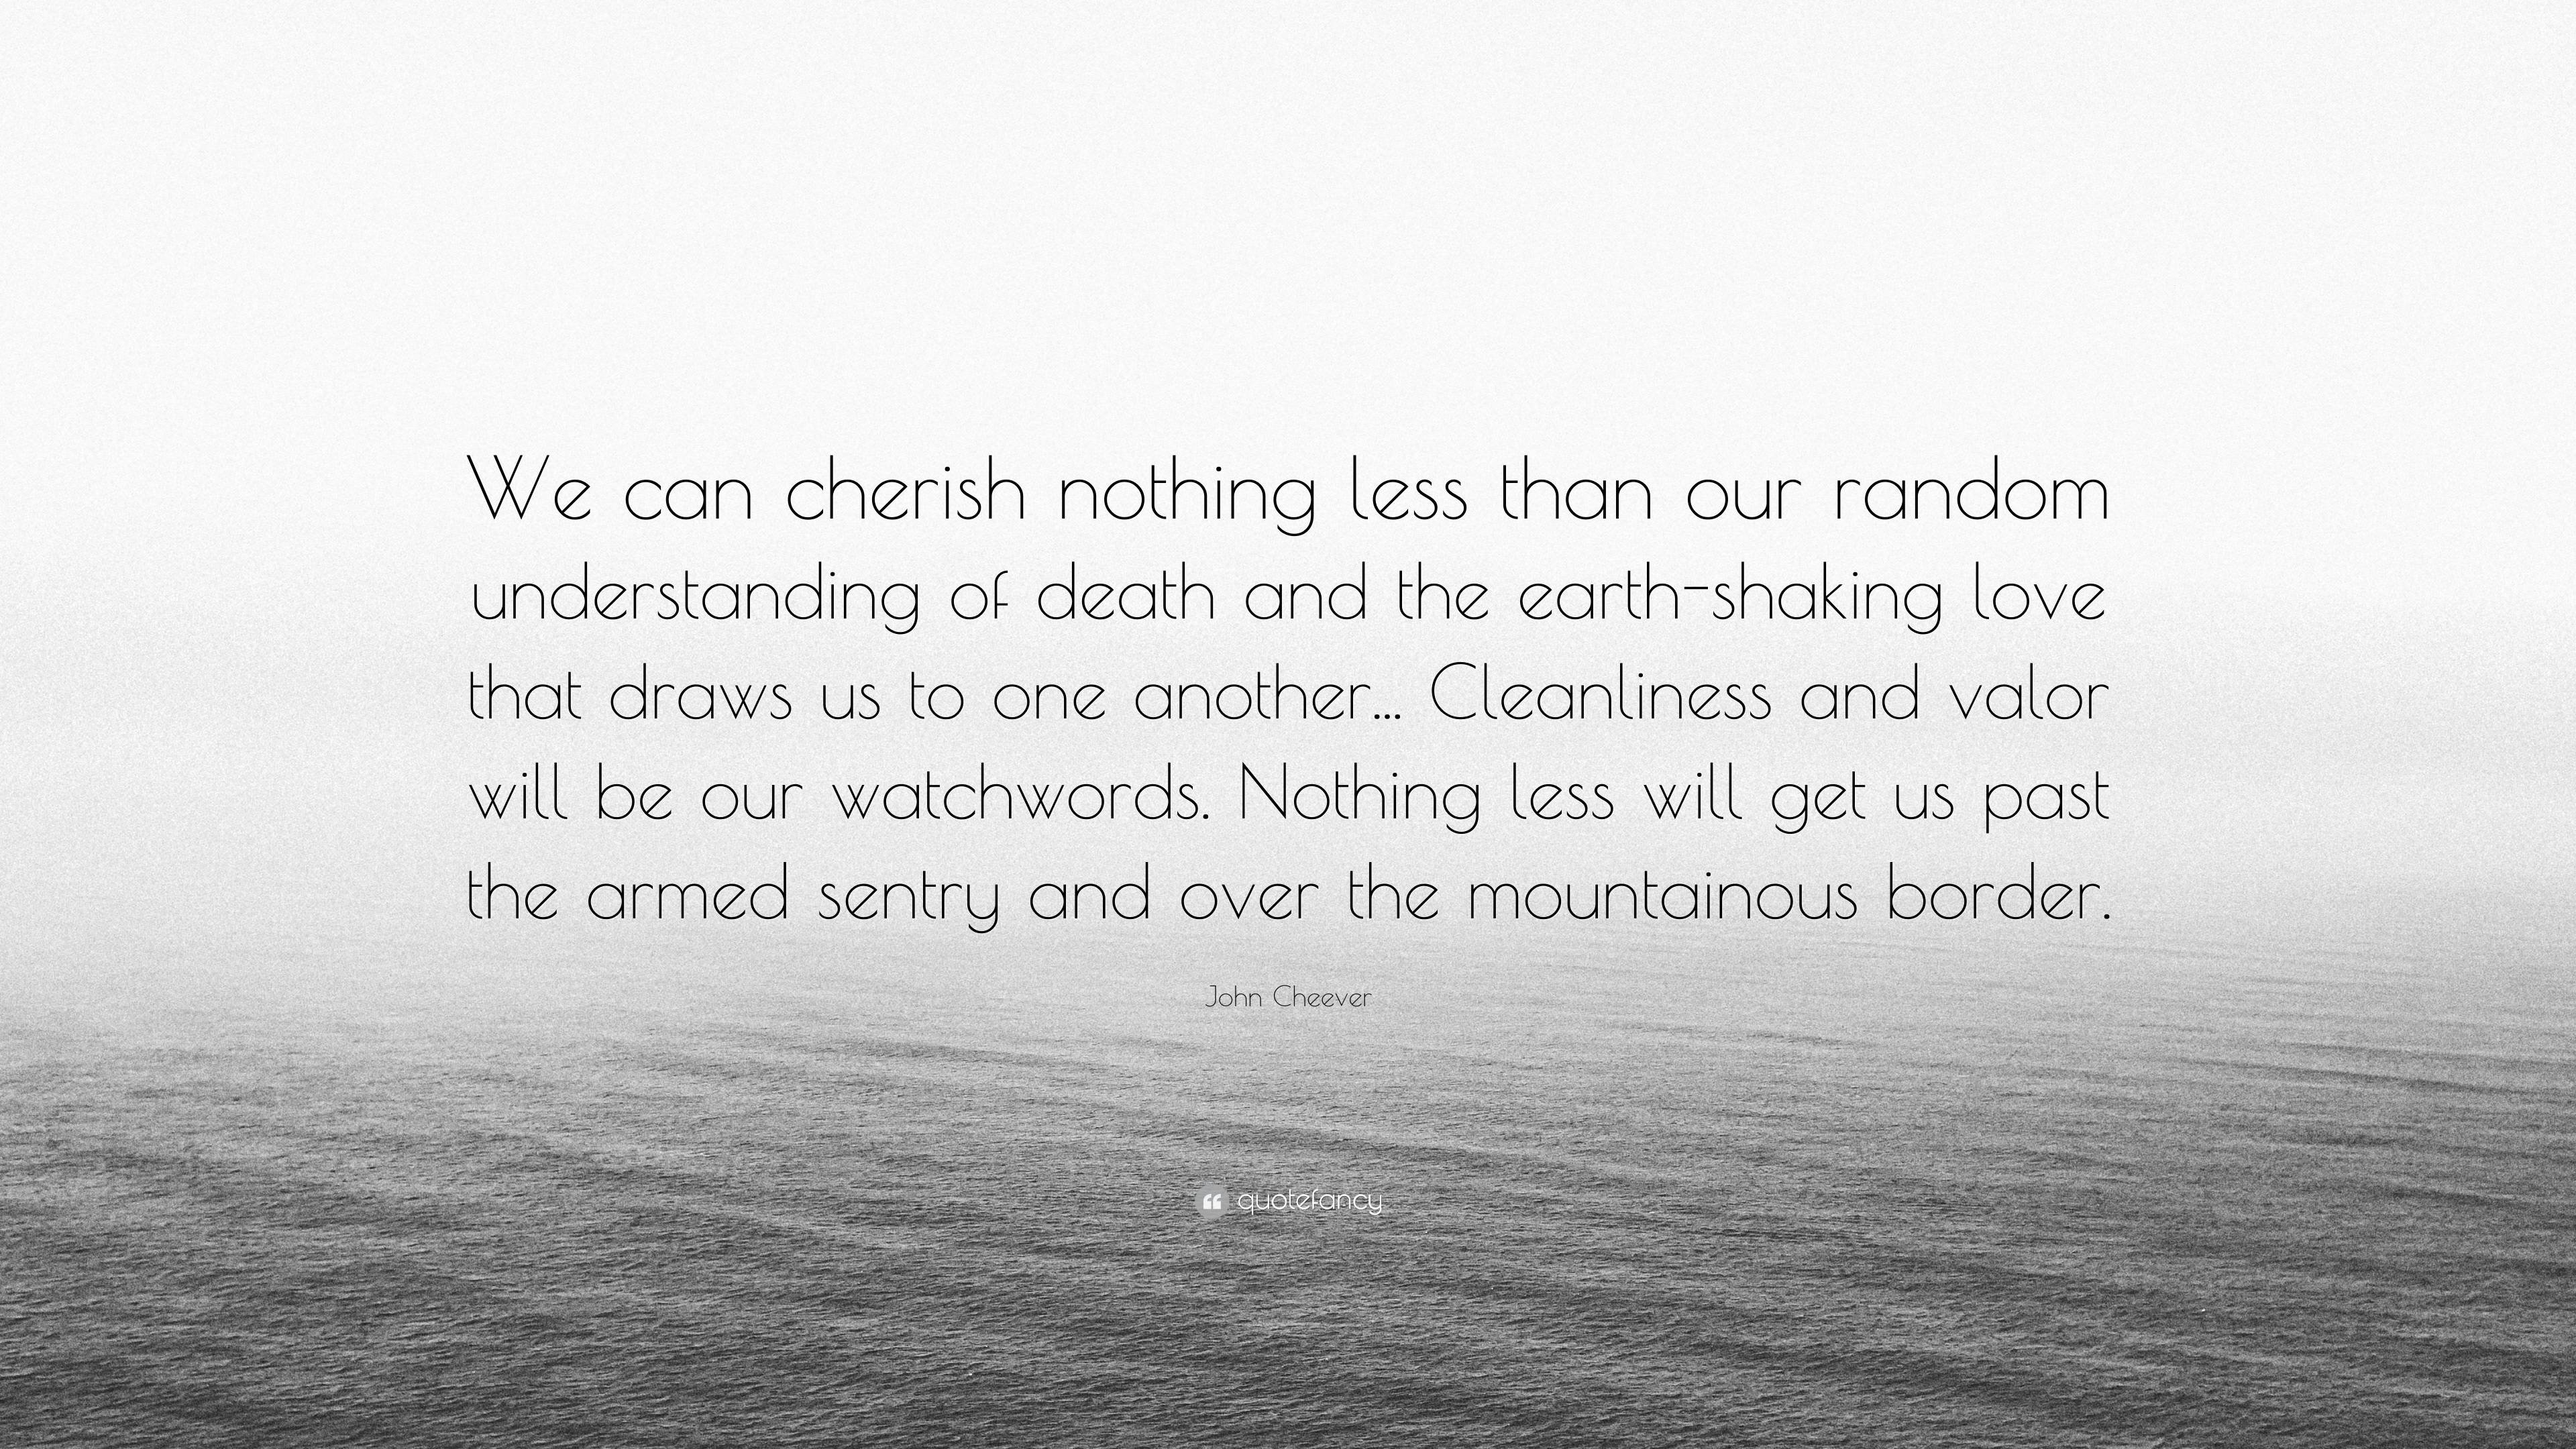 John Cheever Quote: “We can cherish nothing less than our random ...